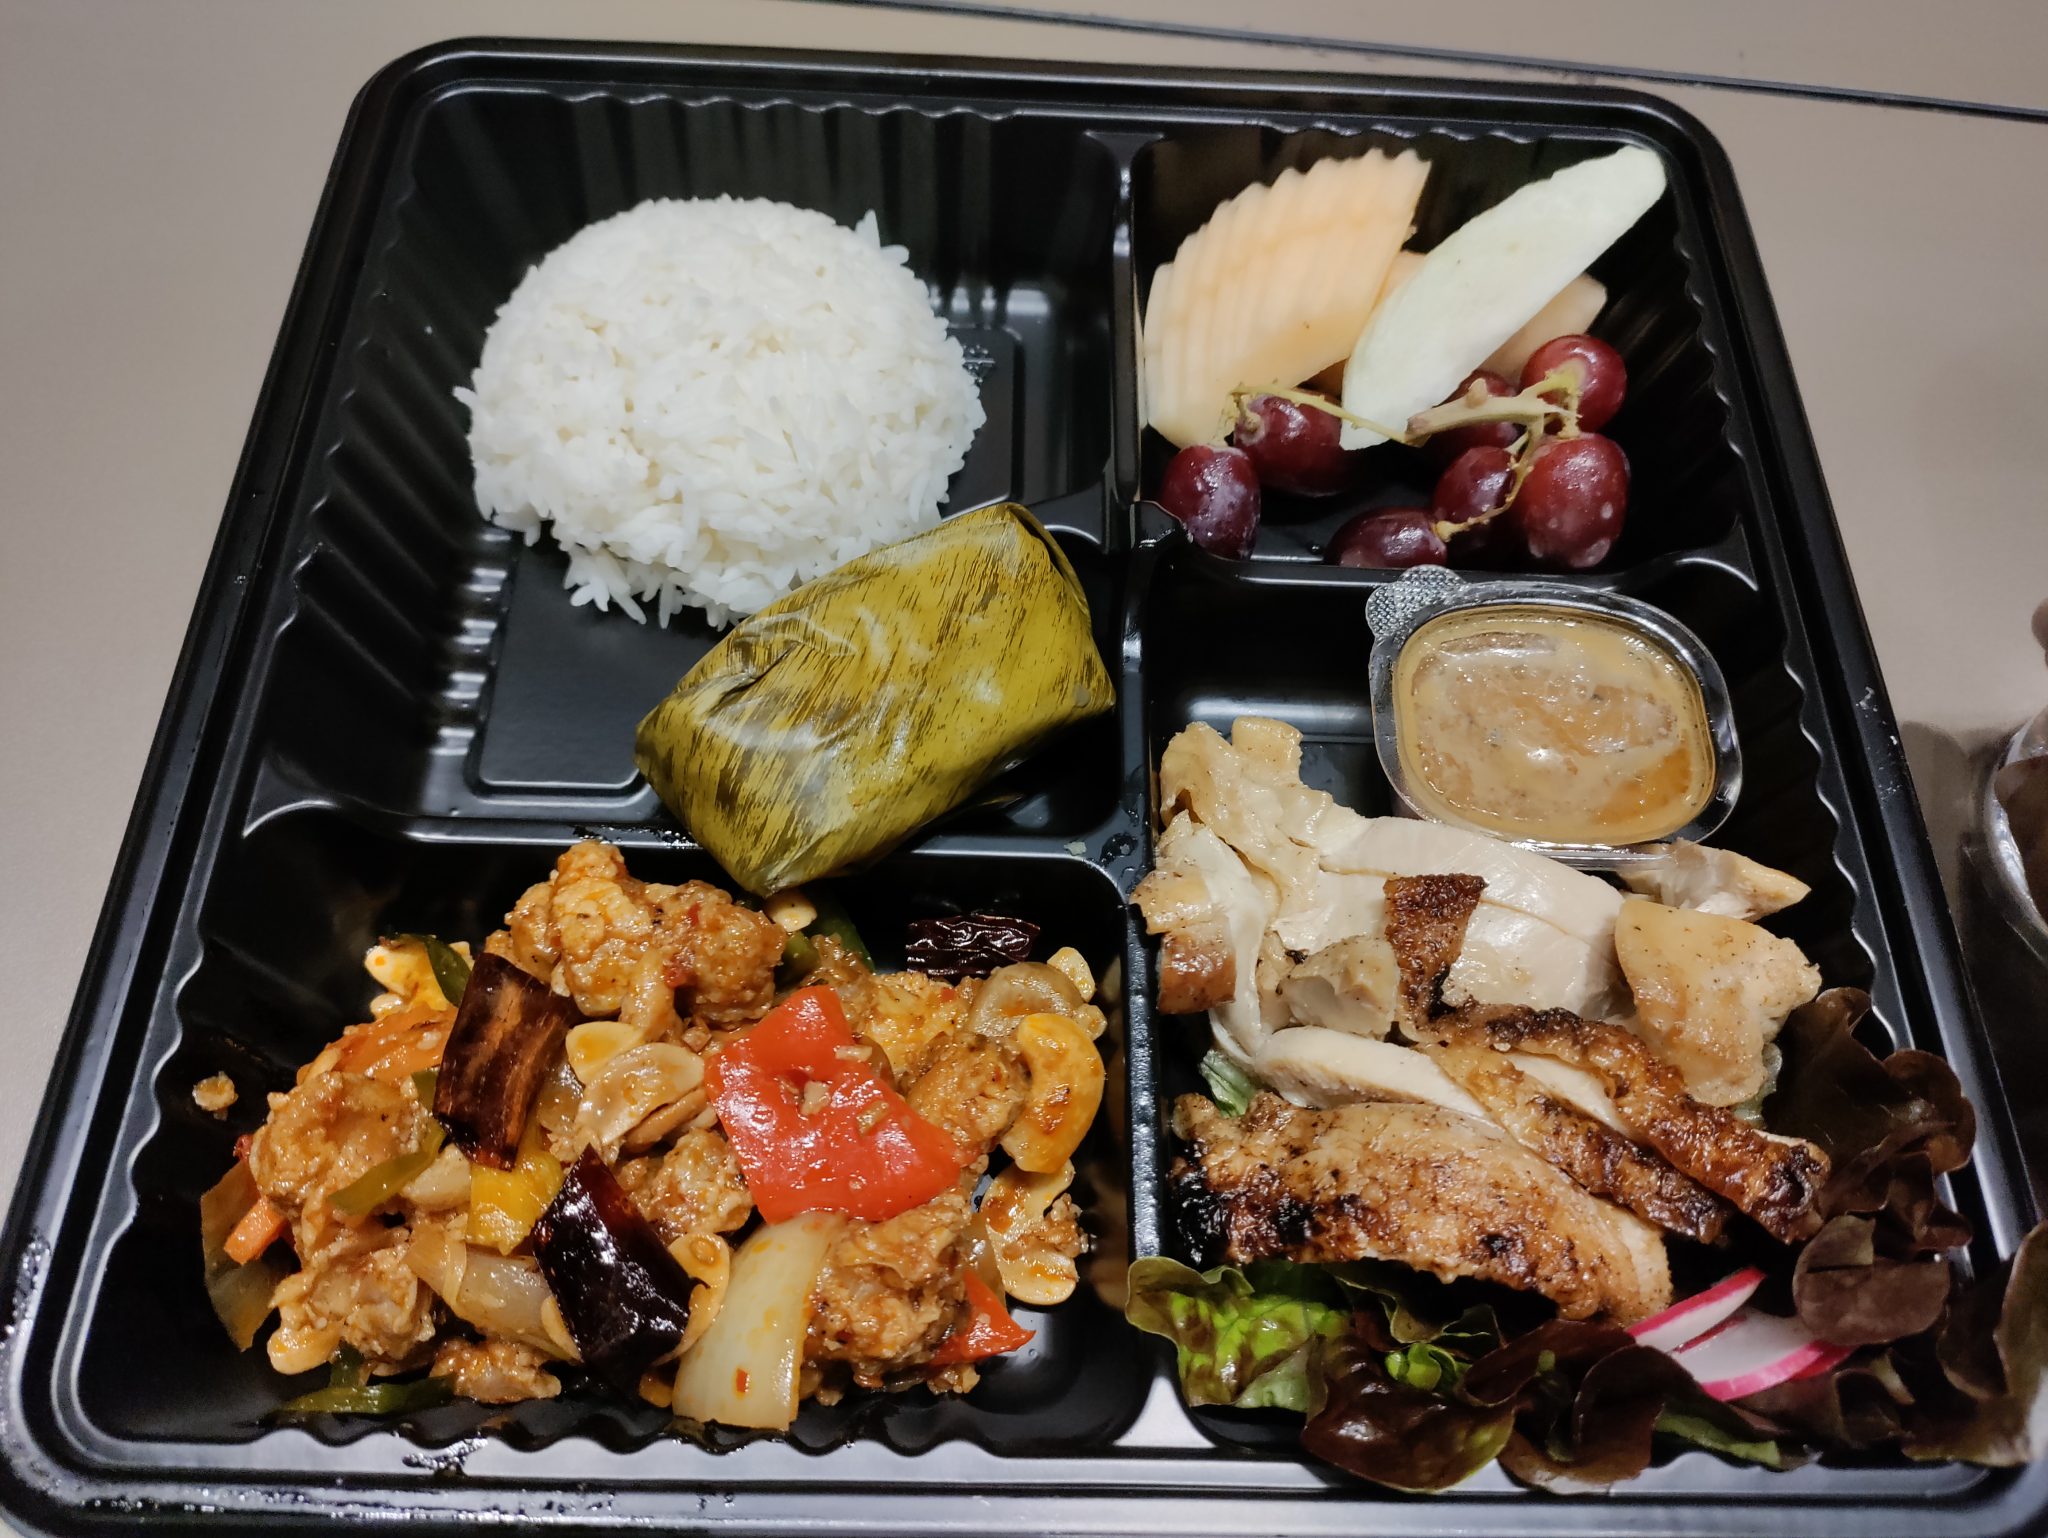 Halal Lunch box of WC Asia Contributor Day